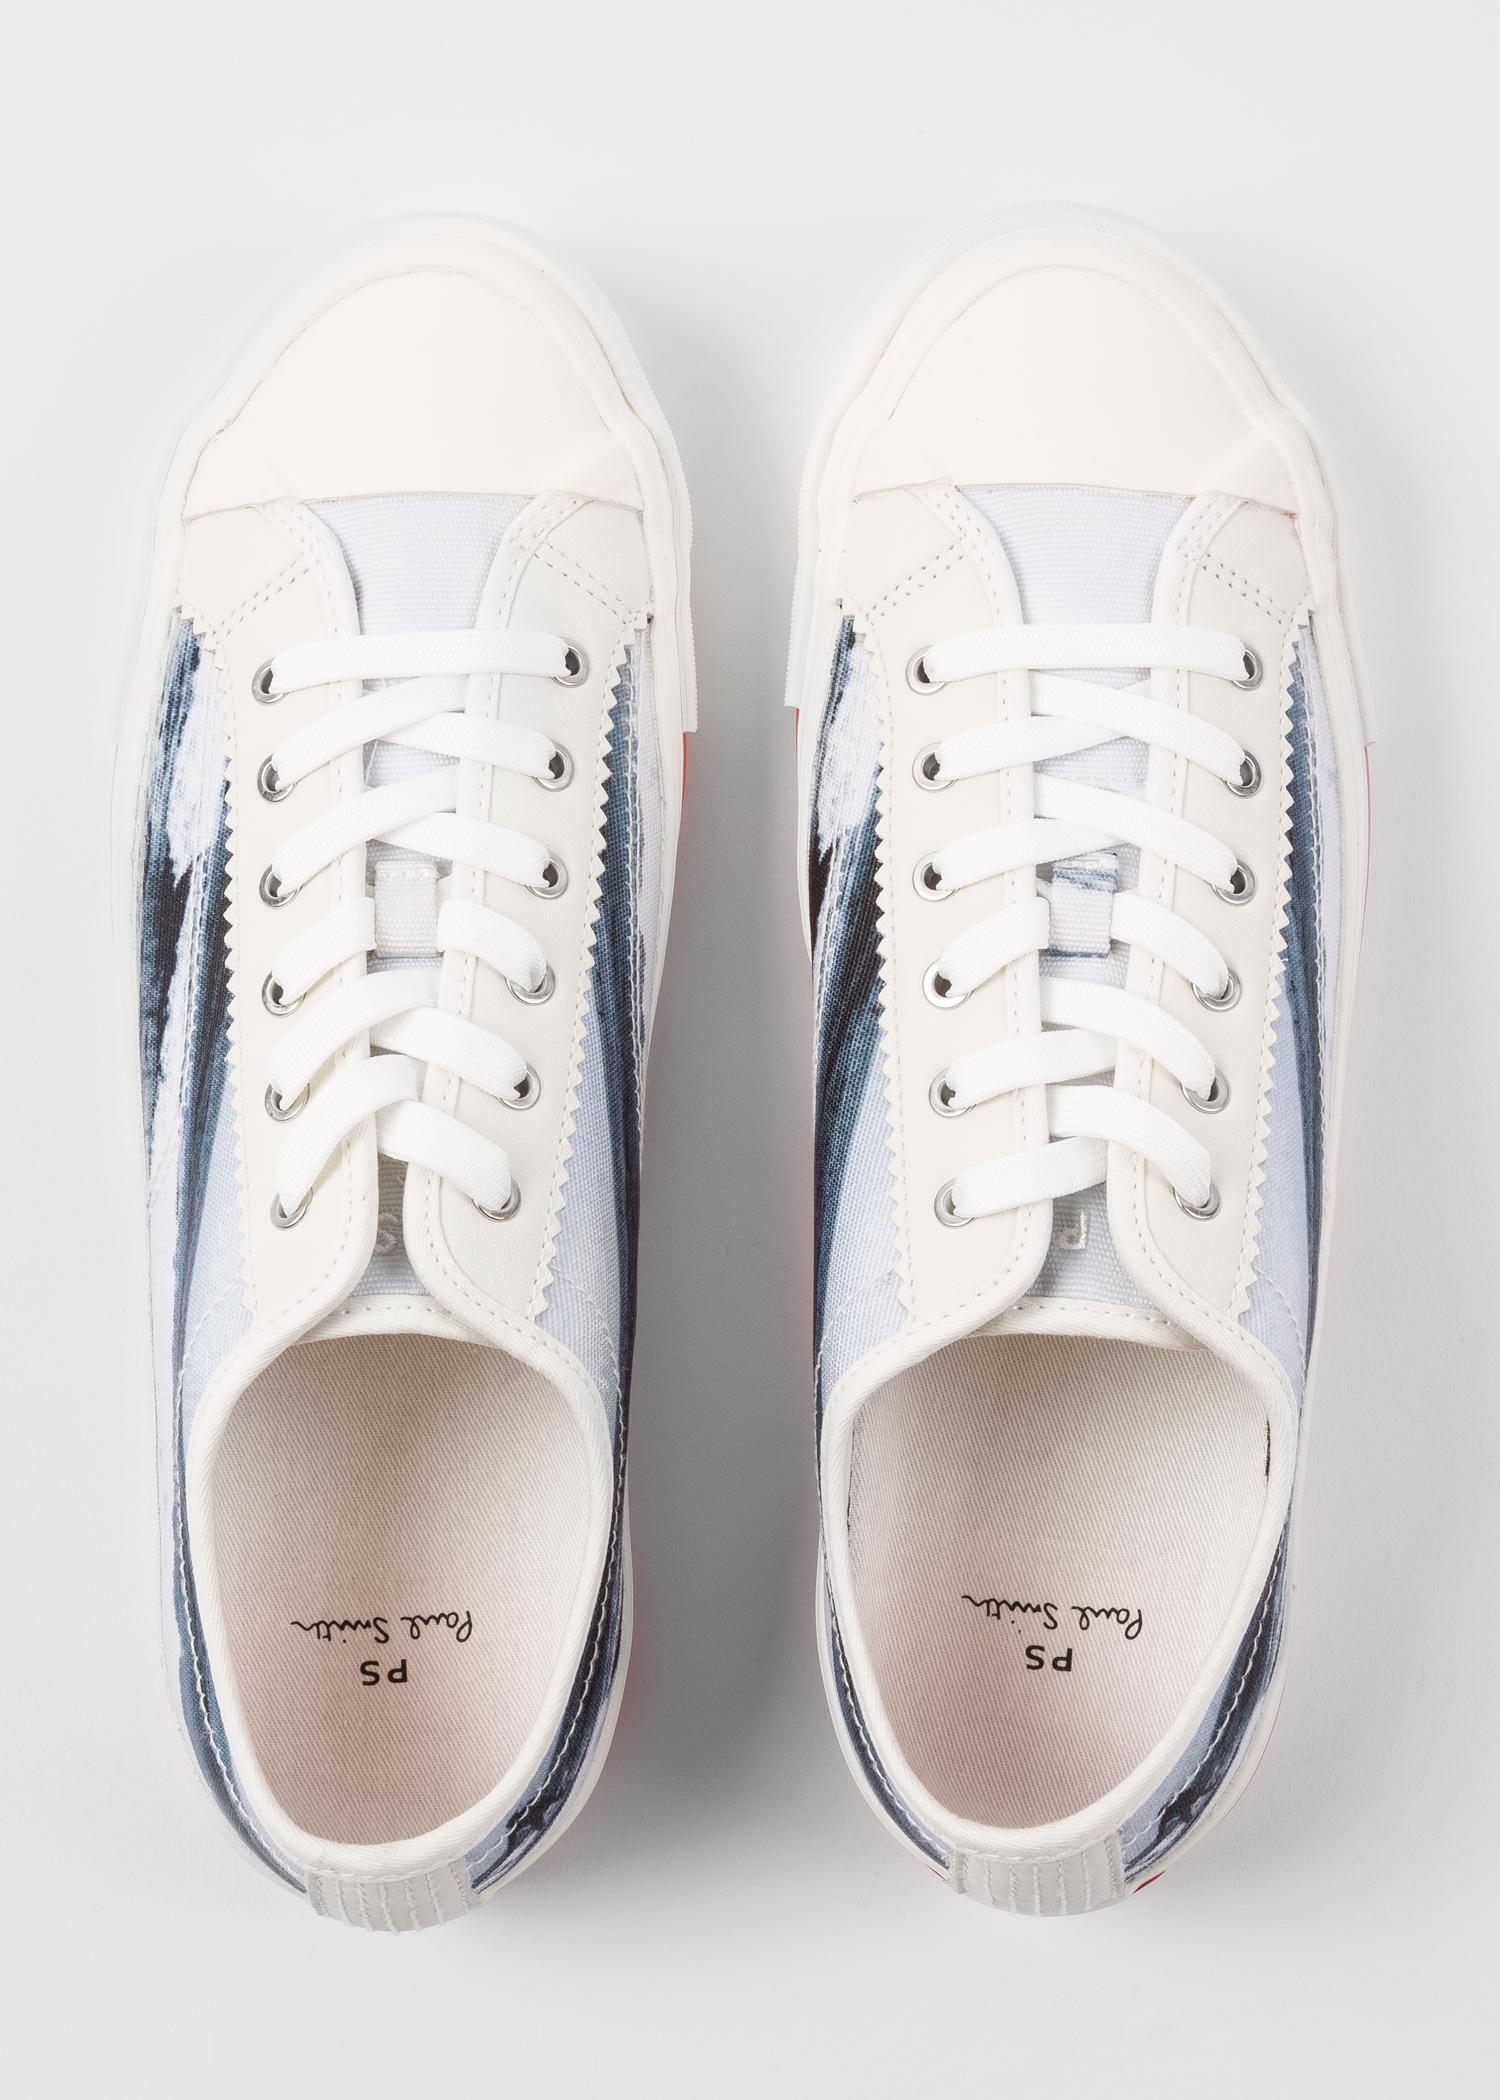 paul smith canvas trainers inexpensive 4f5c4 dc04c